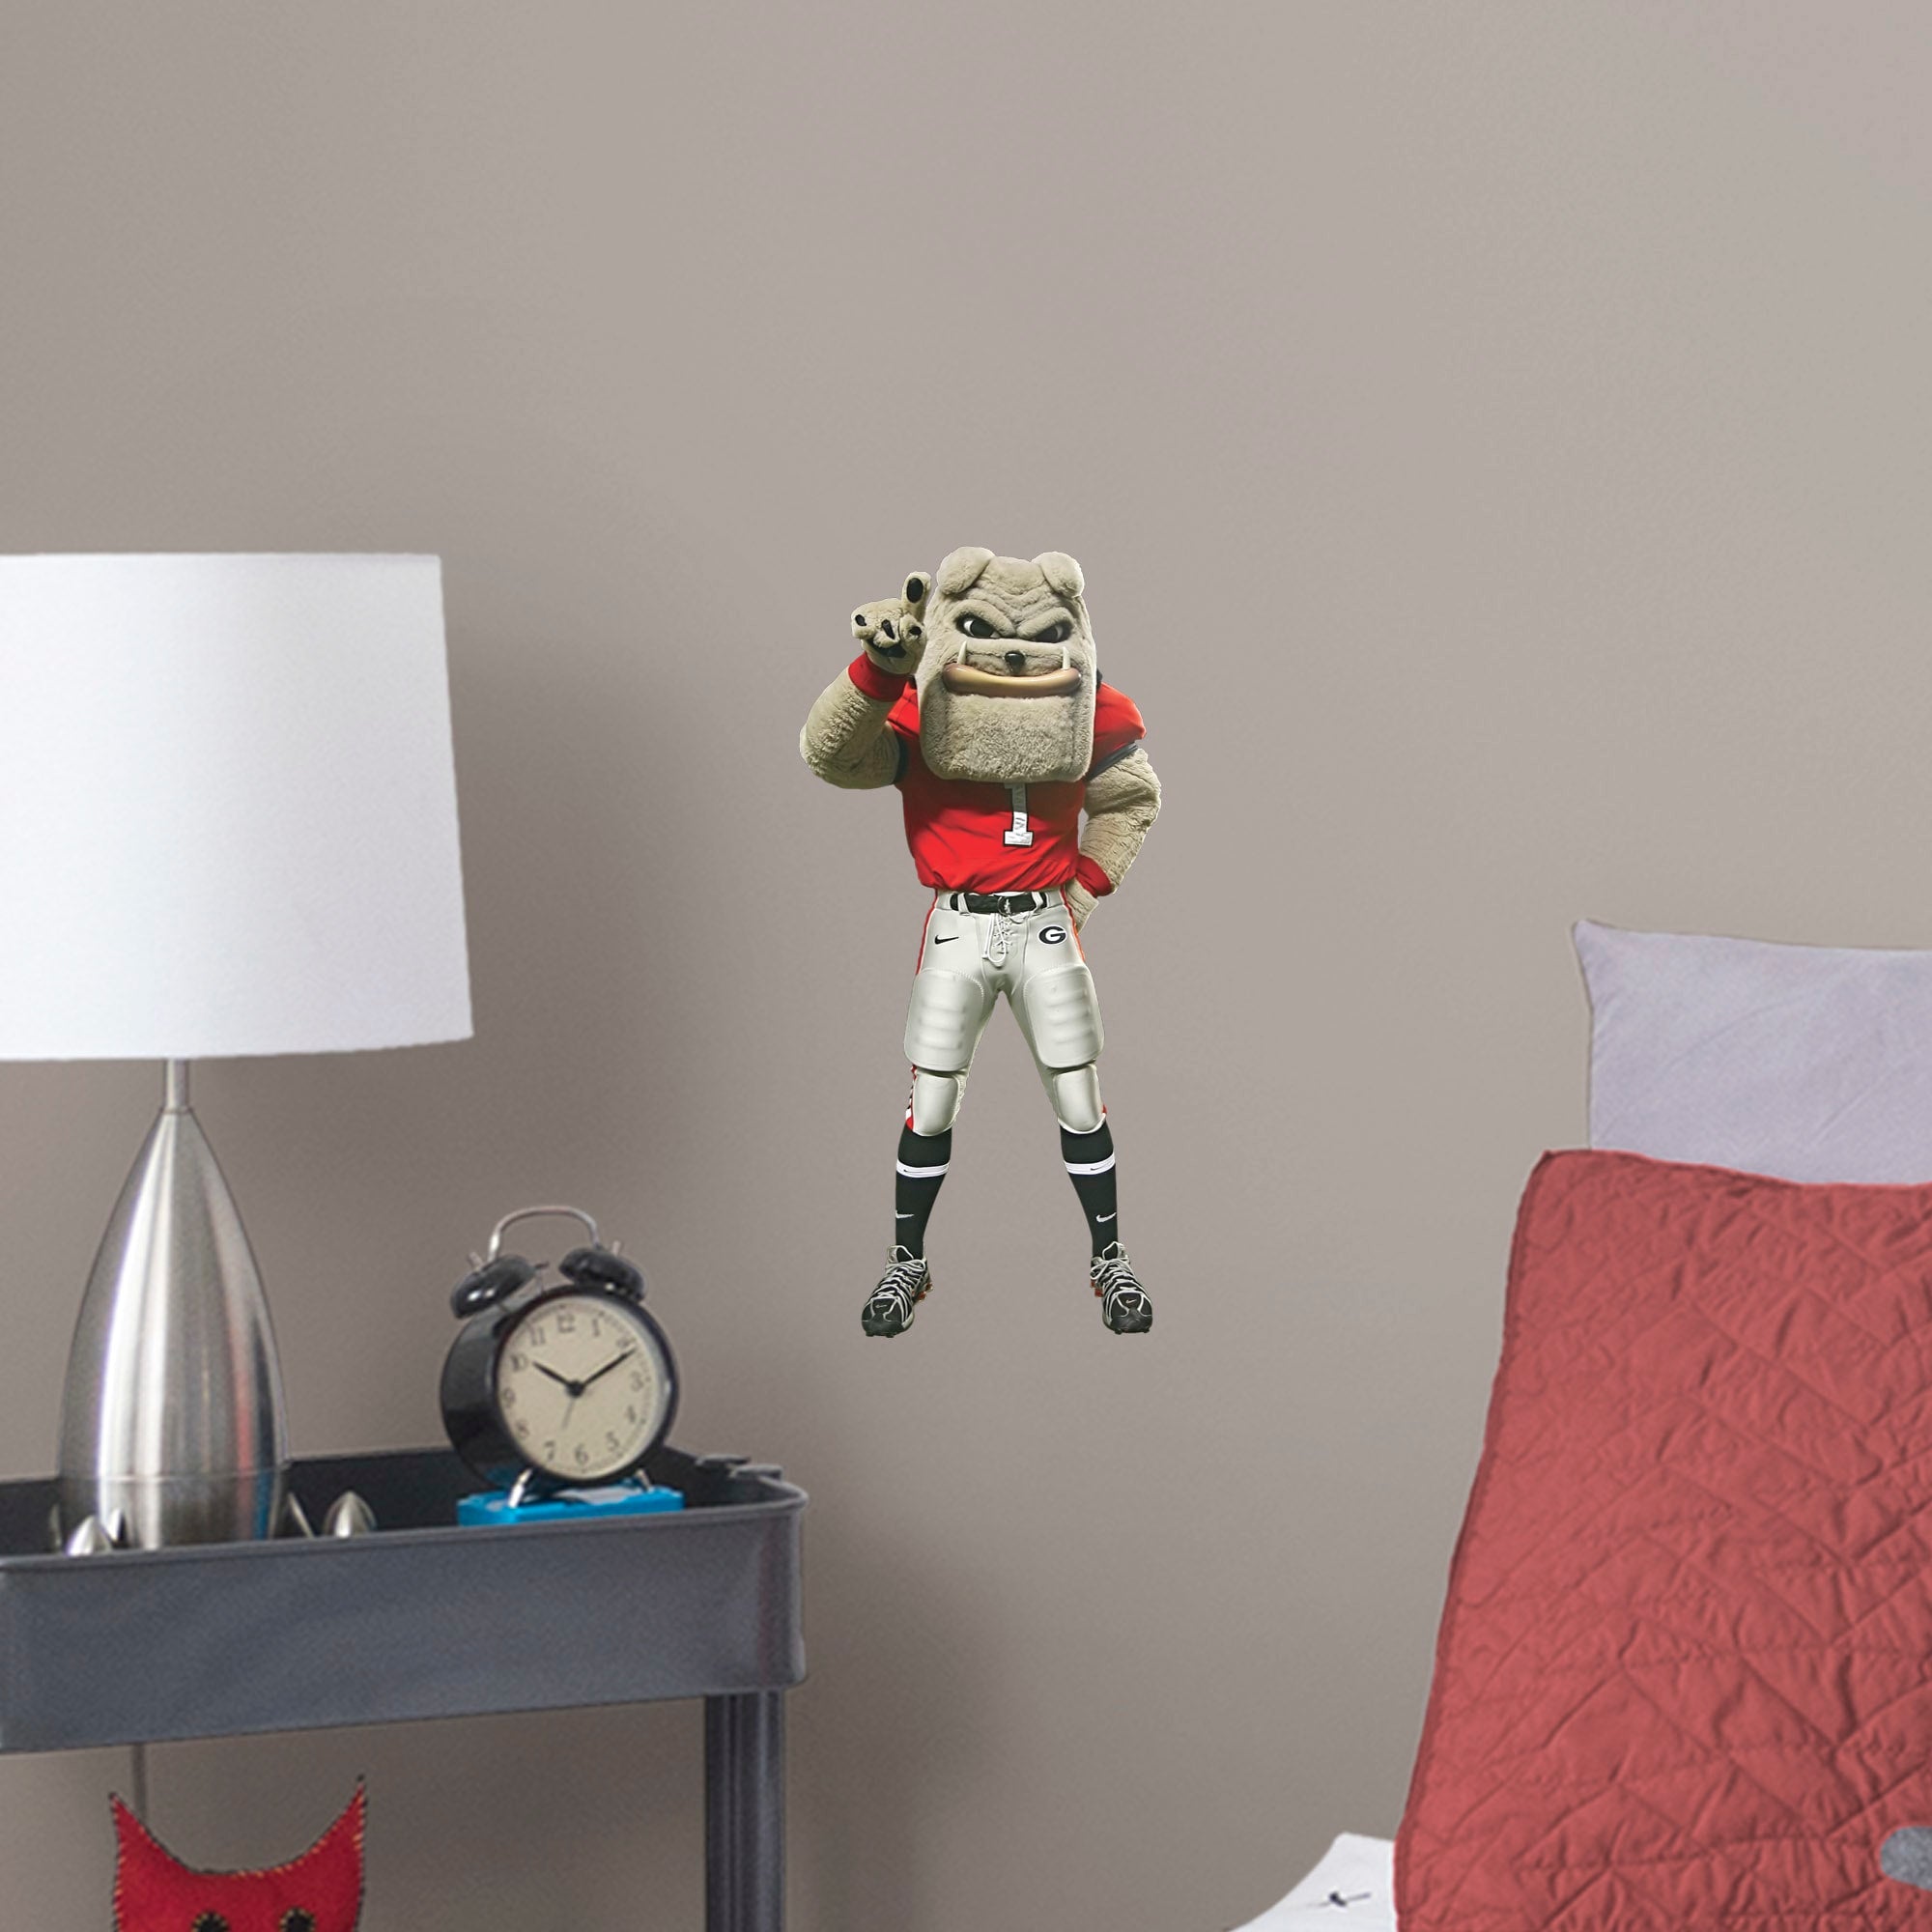 Georgia Bulldogs: Hairy Dawg Mascot - Officially Licensed Removable Wall Decal Large by Fathead | Vinyl